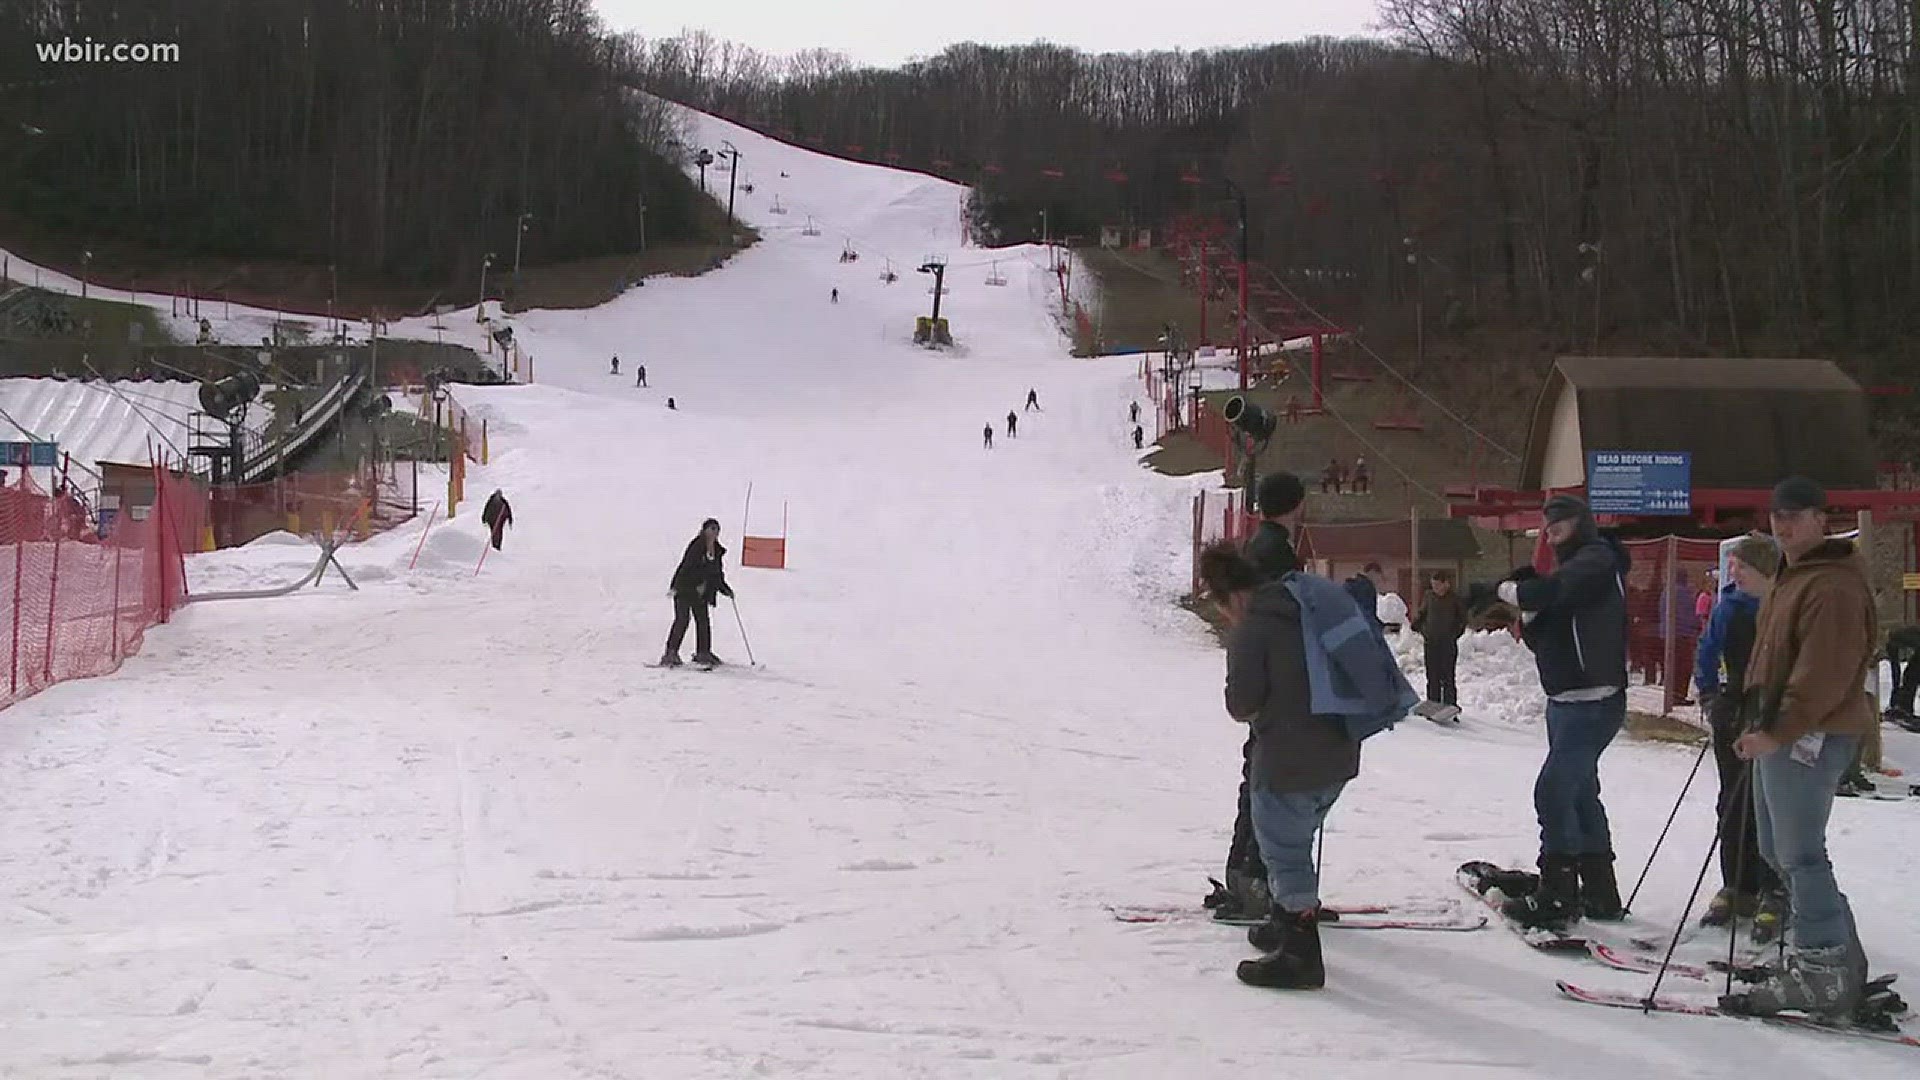 Jan. 26, 2018: Ober Gatlinburg is gearing up for the 2018 Special Winter Olympics.